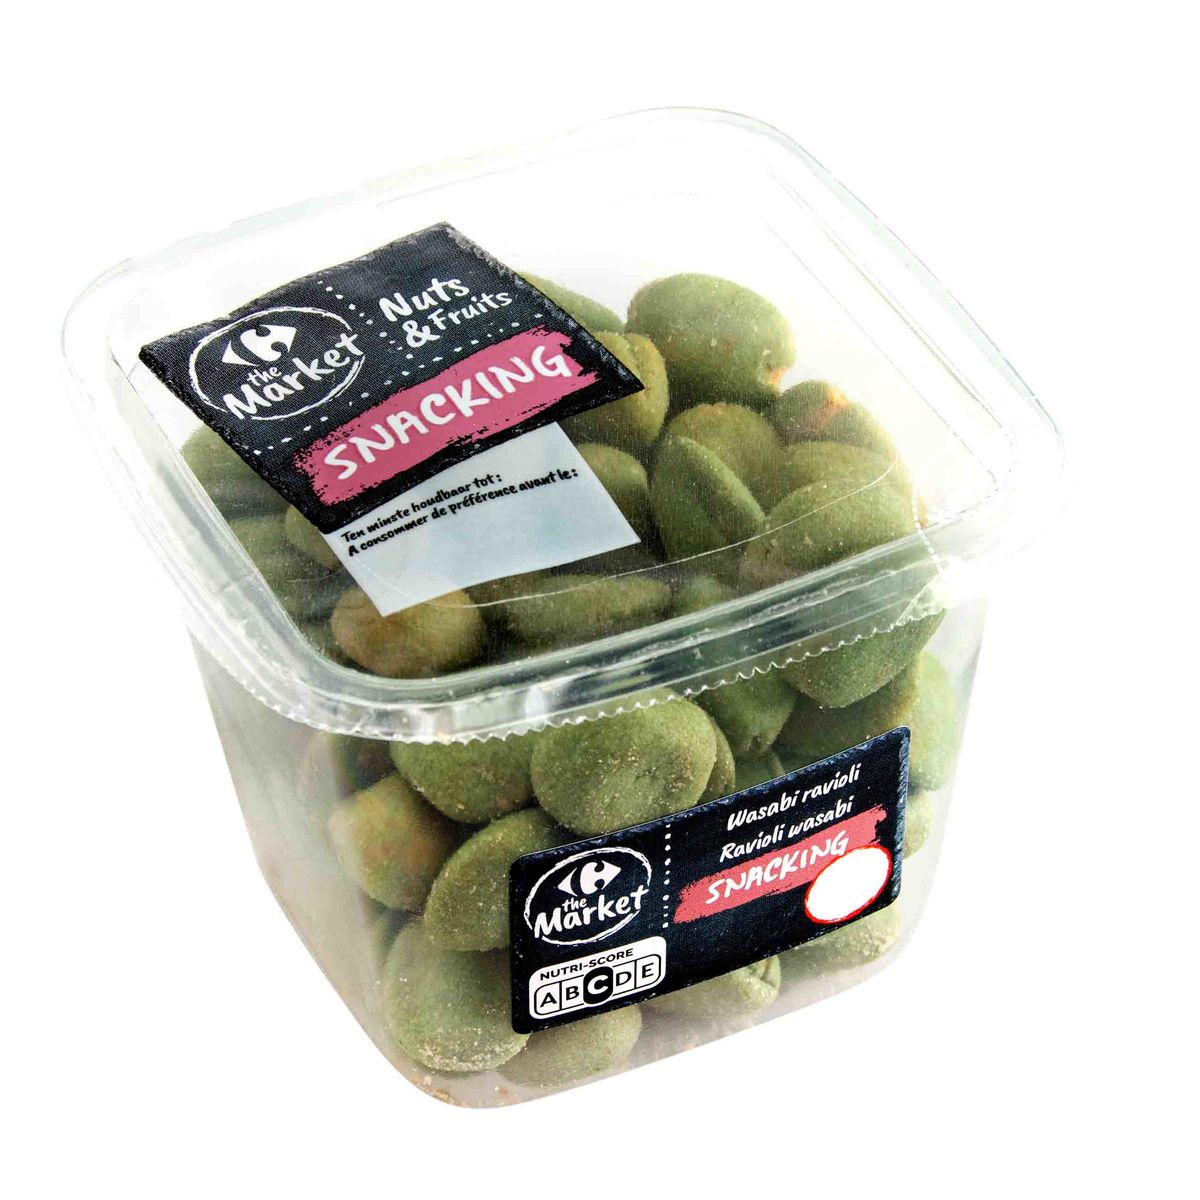 Carrefour The Market Nuts & Fruits Wasabi Ravioli Snacking 160 g